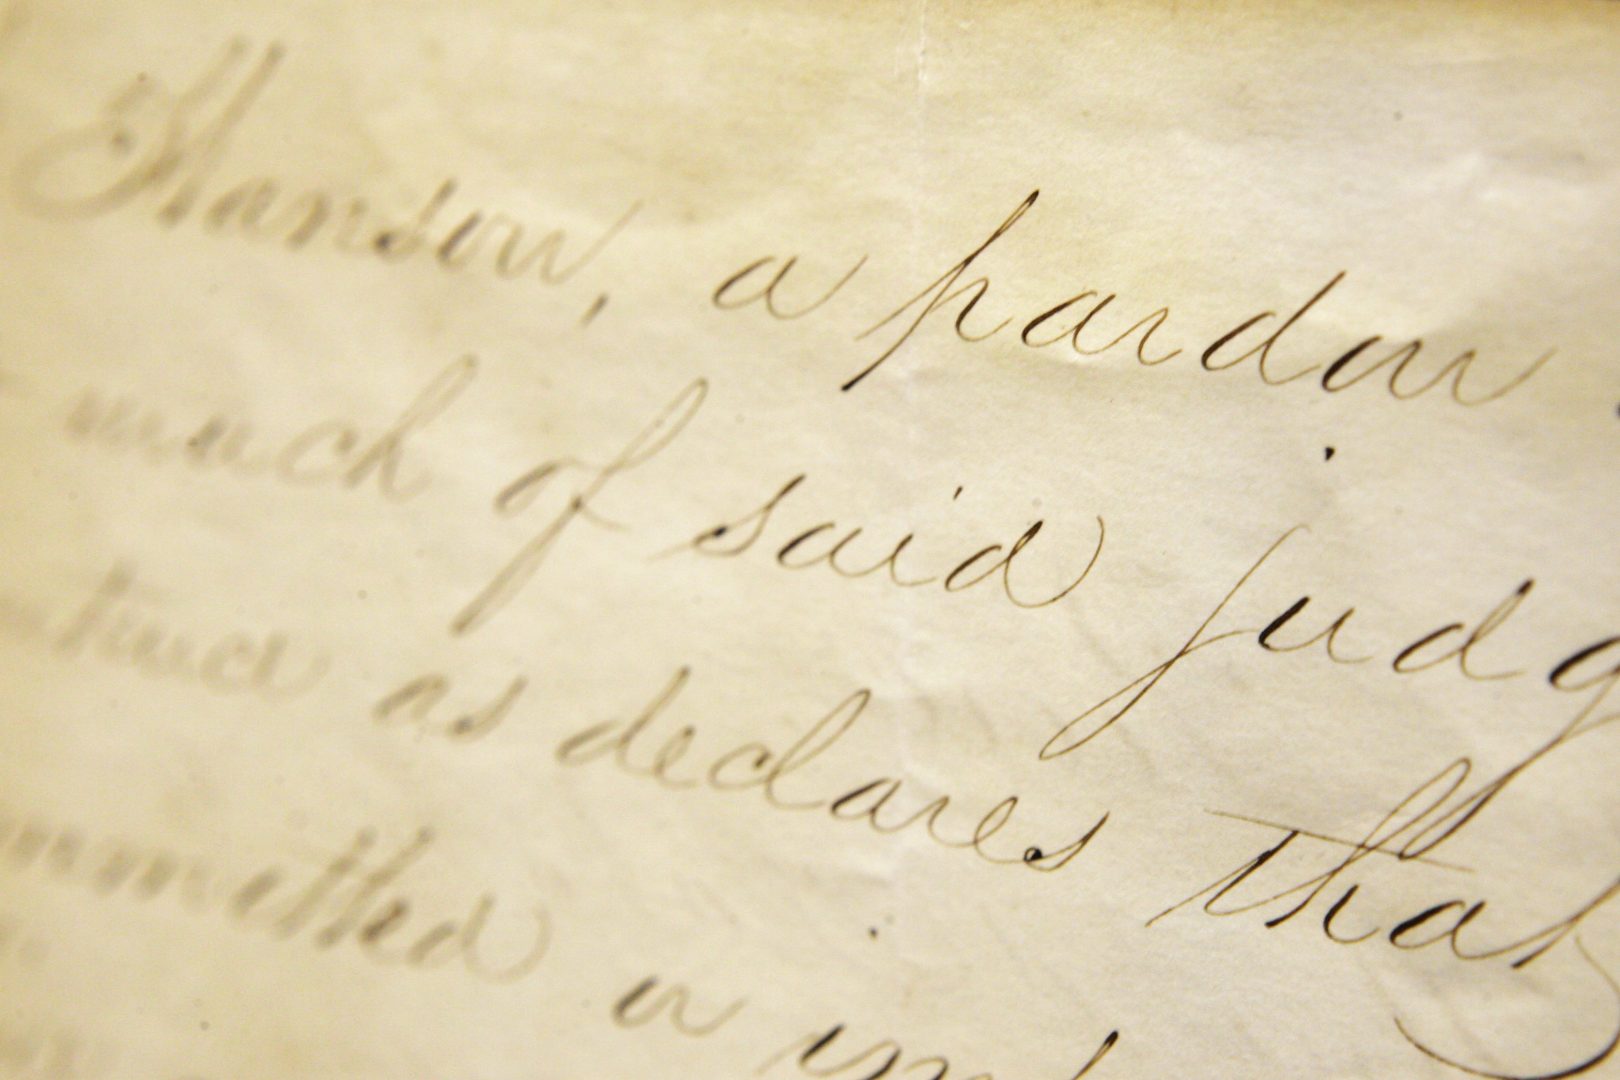 FILE PHOTO: A detail of an 1854 presidential pardon document by President Franklin Pierce, which grants clemency to Noah C. Hanson who was convicted for harboring slaves, is displayed at The Raab Collection office in Philadelphia, Monday, July 16, 2007. 